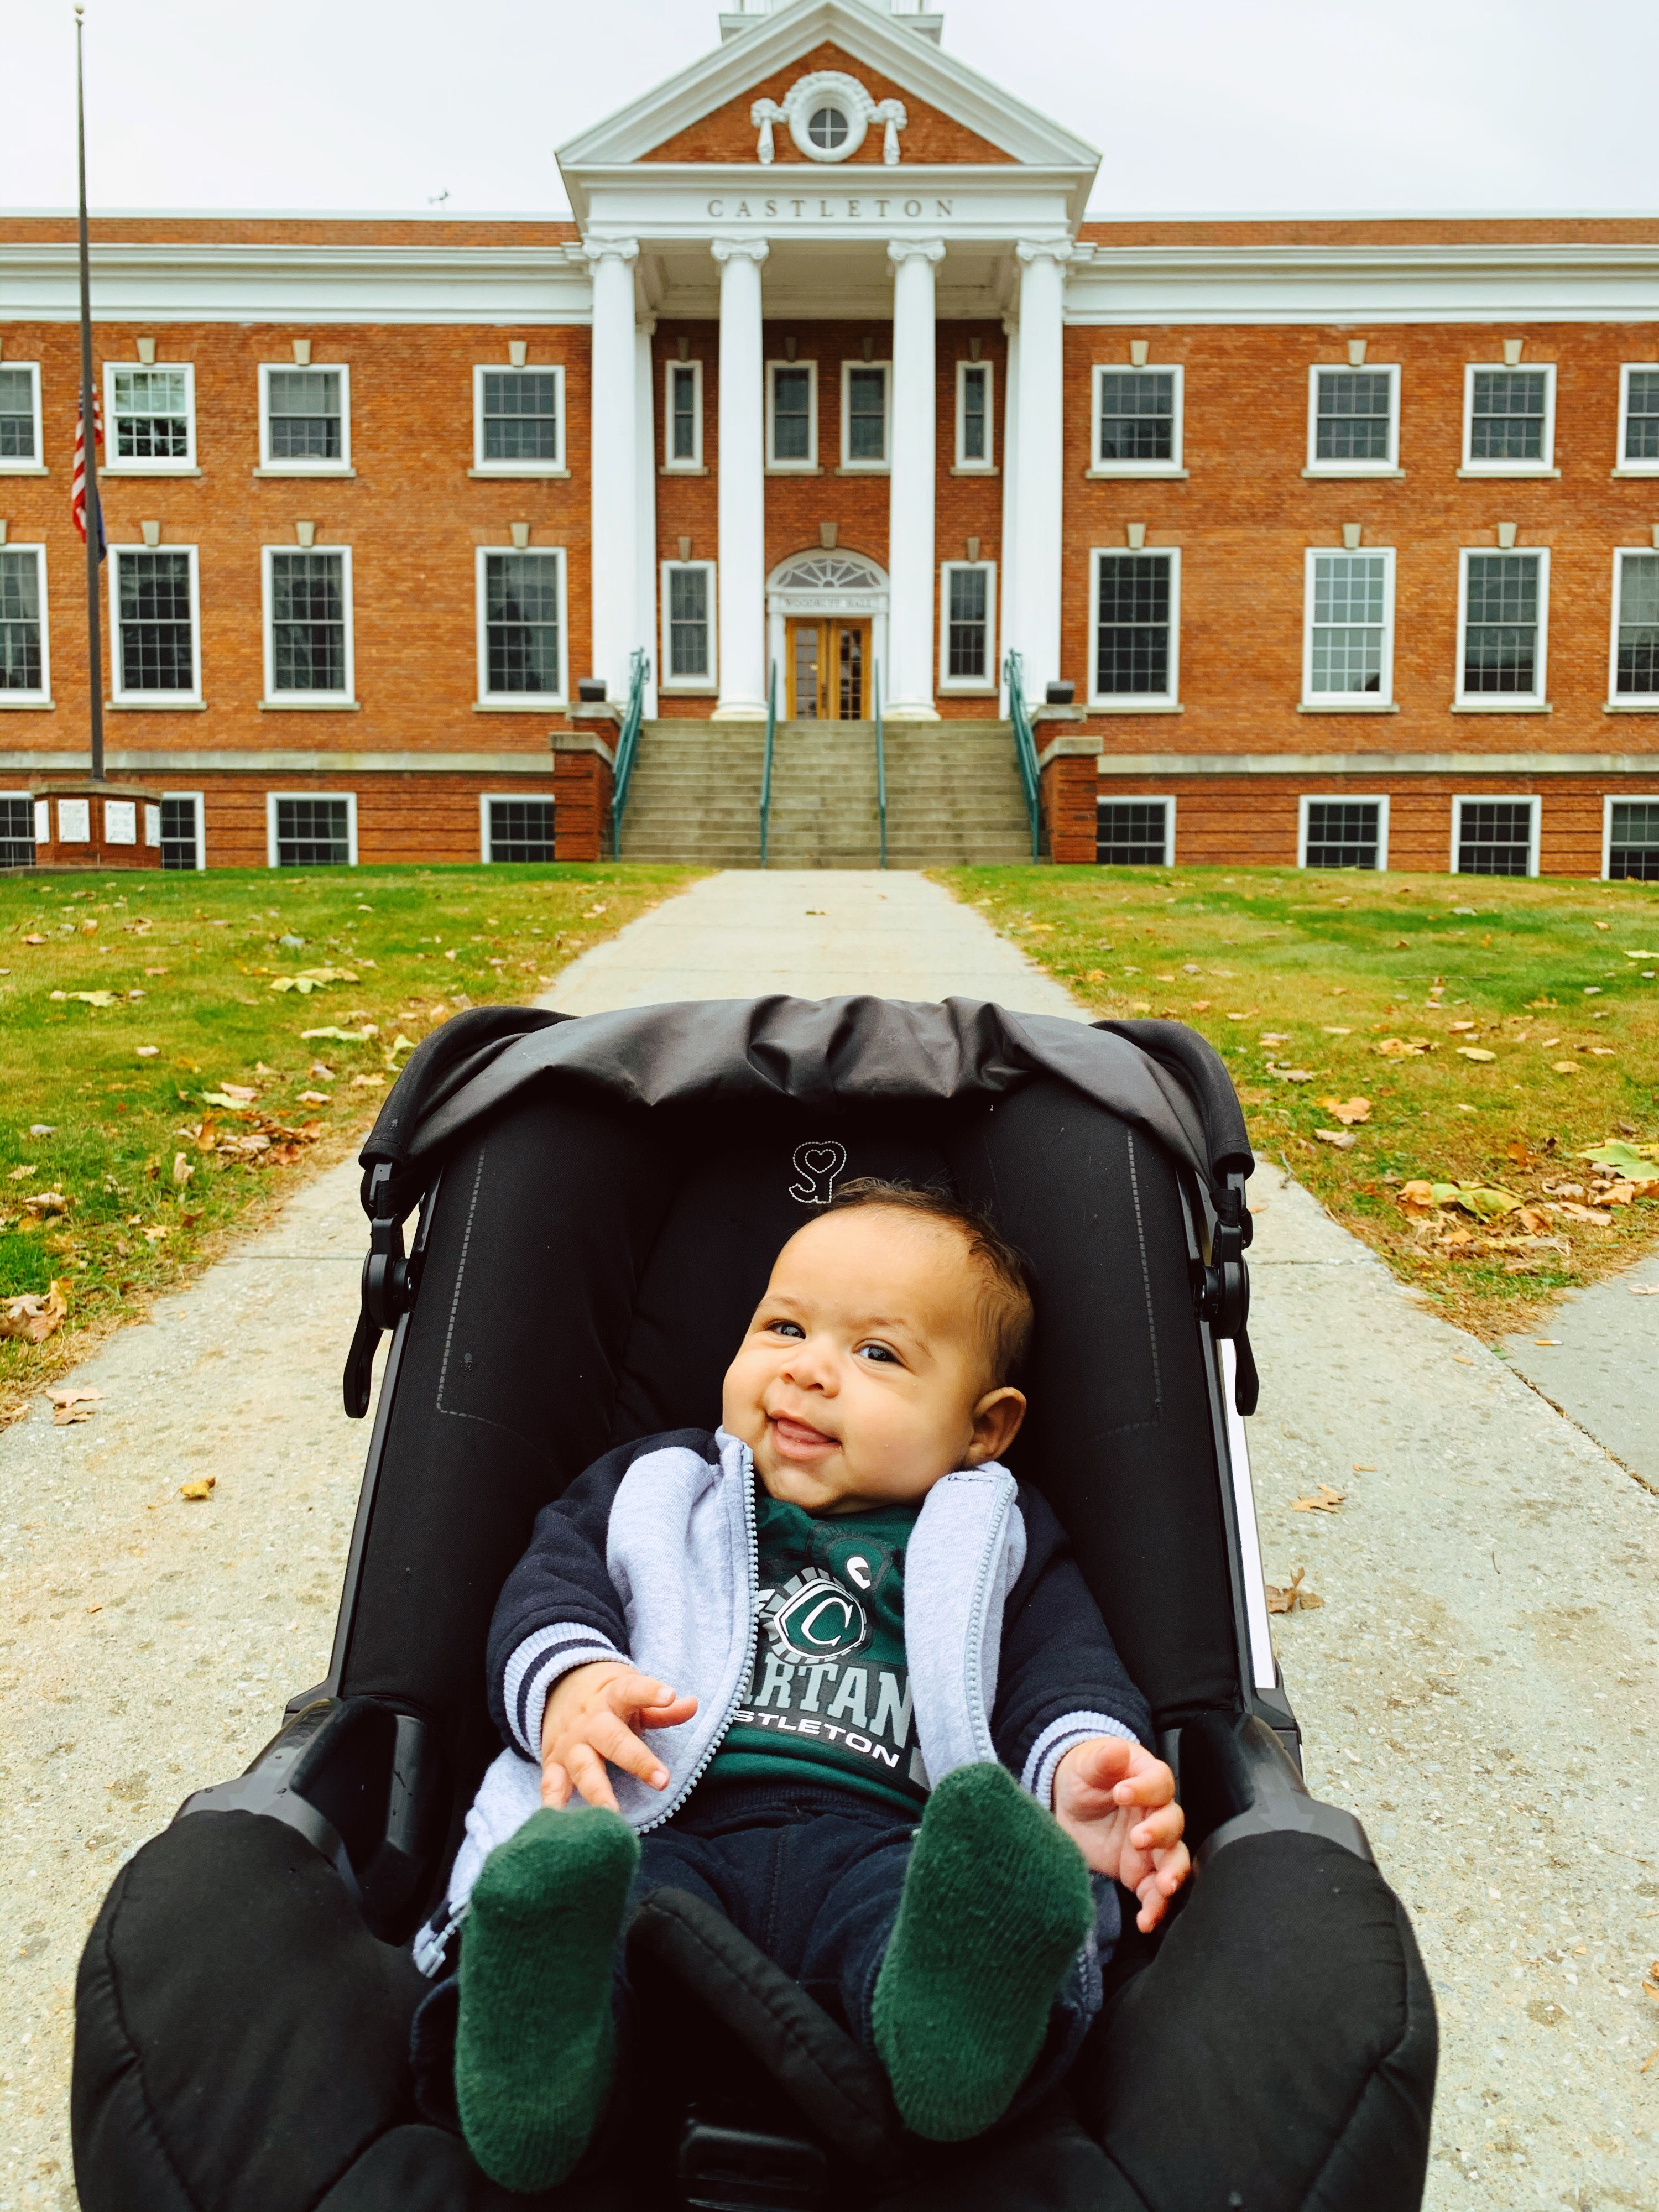 The class of 2041 has arrived